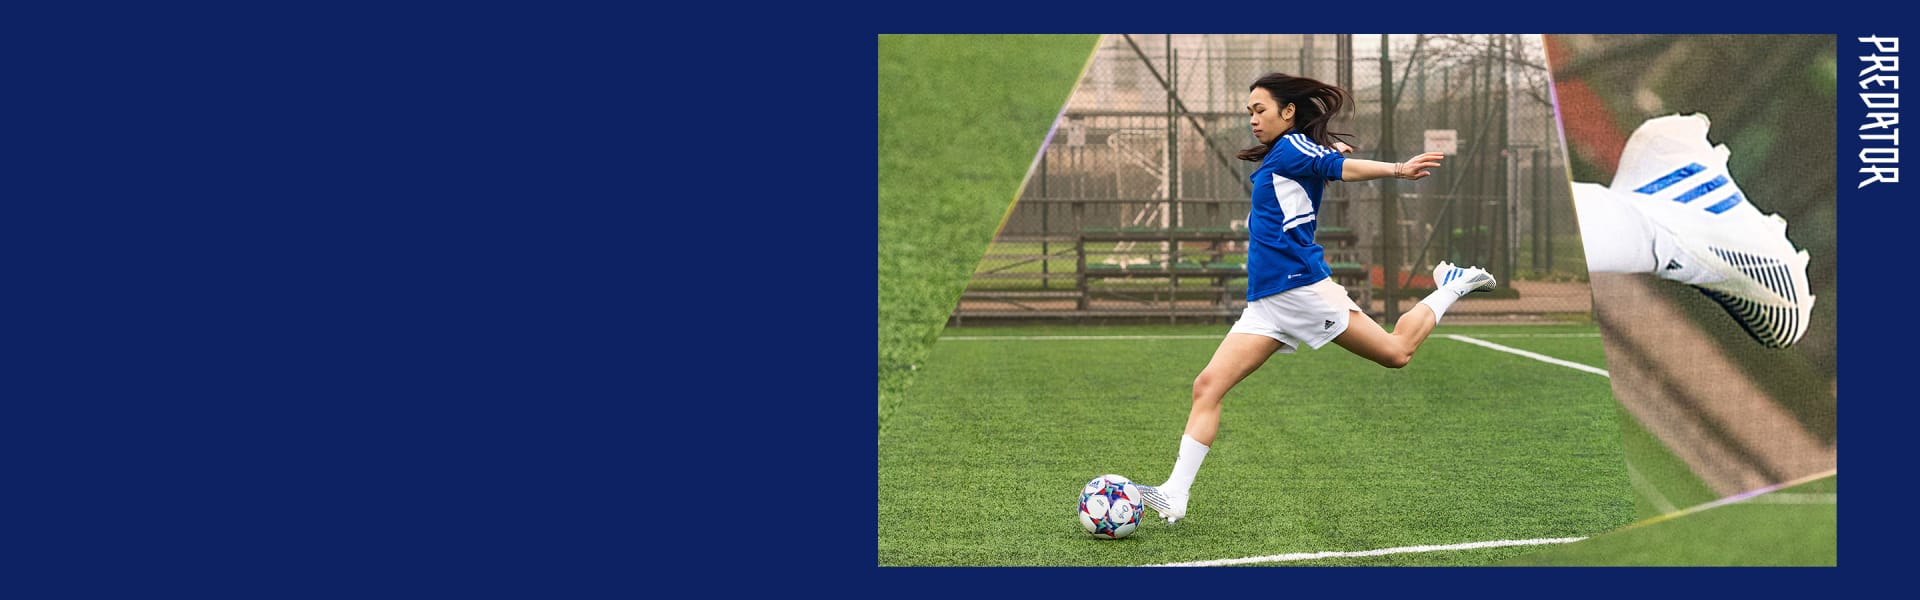 Image of female player, blue and white kit, kicking the ball on the pitch. Right hand side we see just the boot.